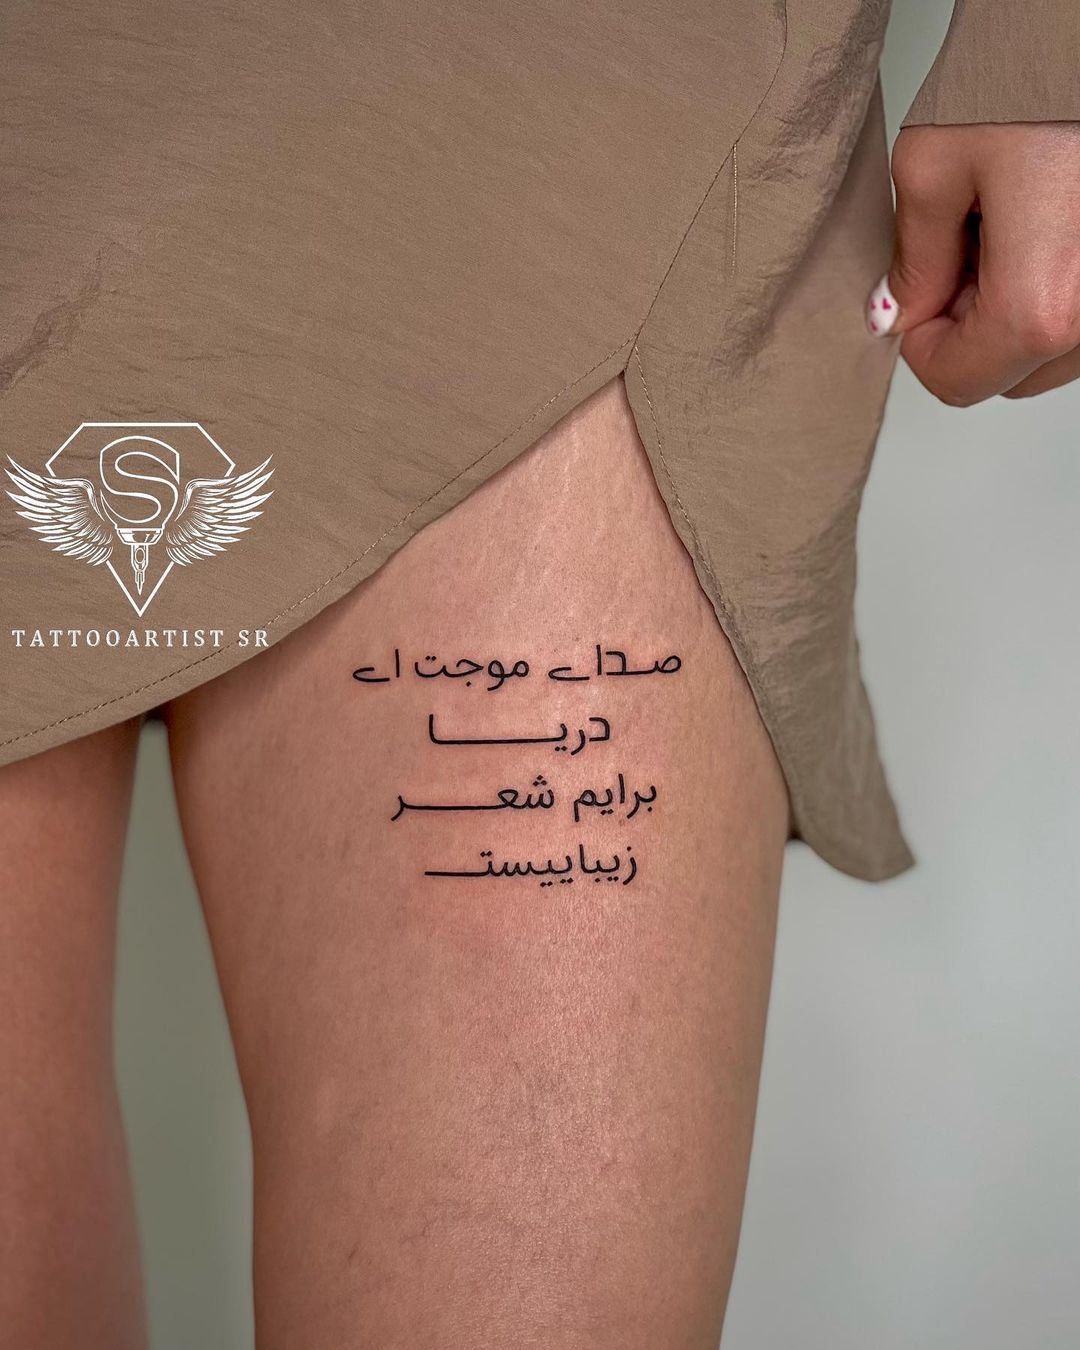 Little Tattoos — Little thigh tattoo saying “The best day of your...